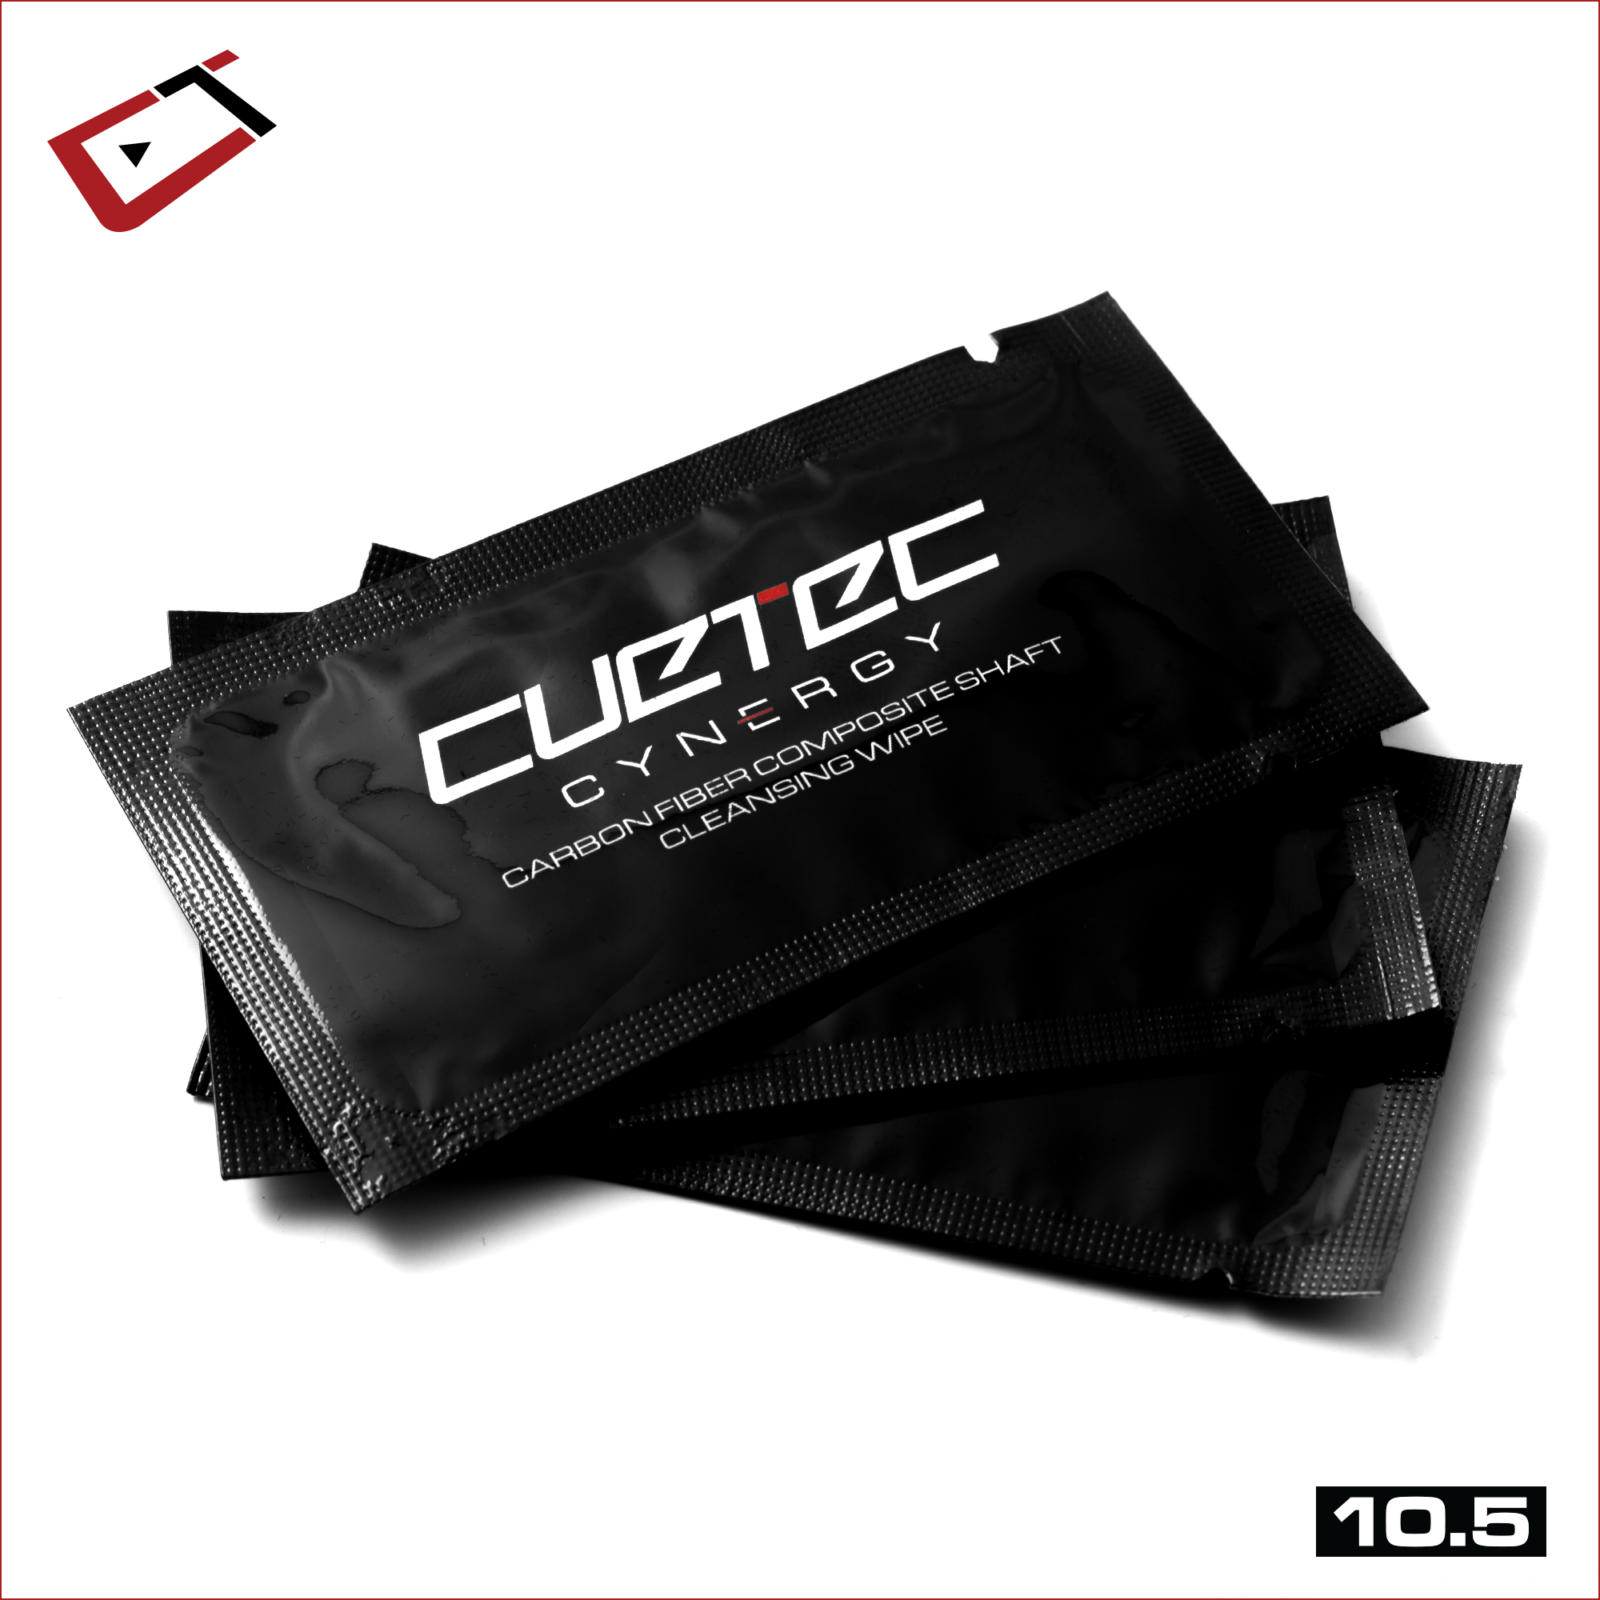 Cuetec Cynergy Shaft 10.5mm 3/8x14 21.3mm 95-030T Wipes